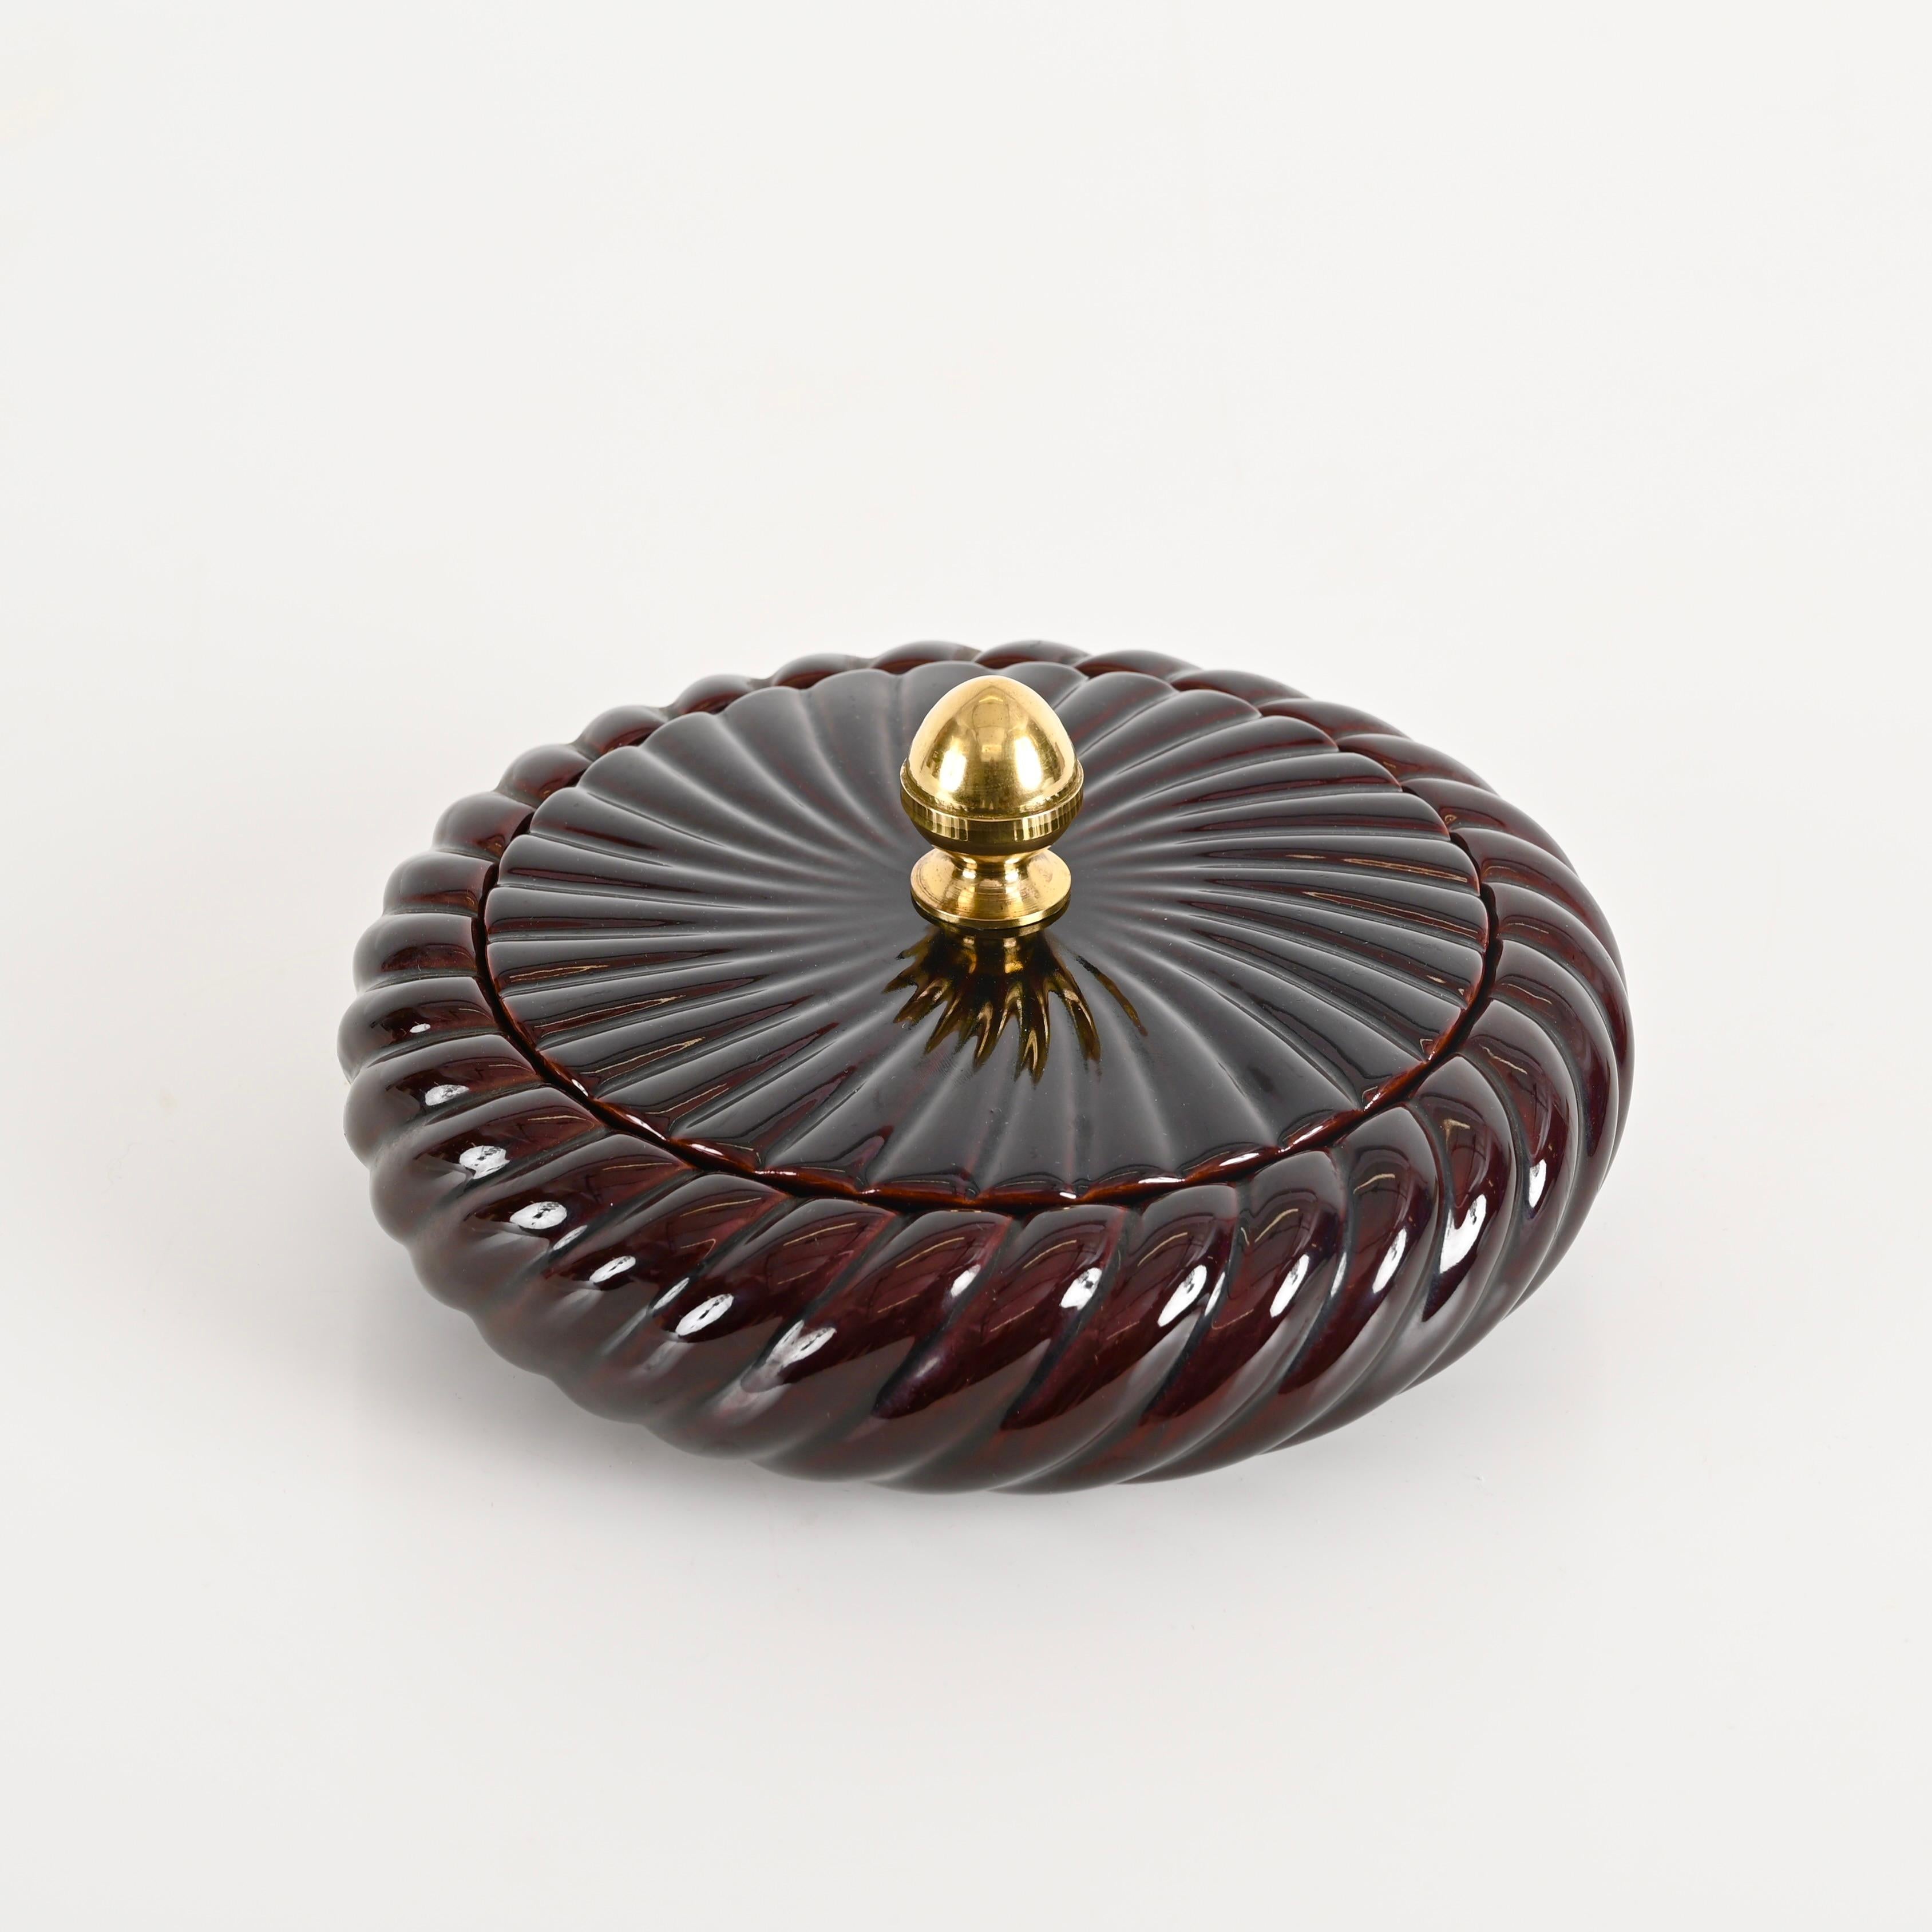 Tommaso Barbi Brown Ceramic and Brass Decorative Box or Centerpiece, Italy 1970s For Sale 10